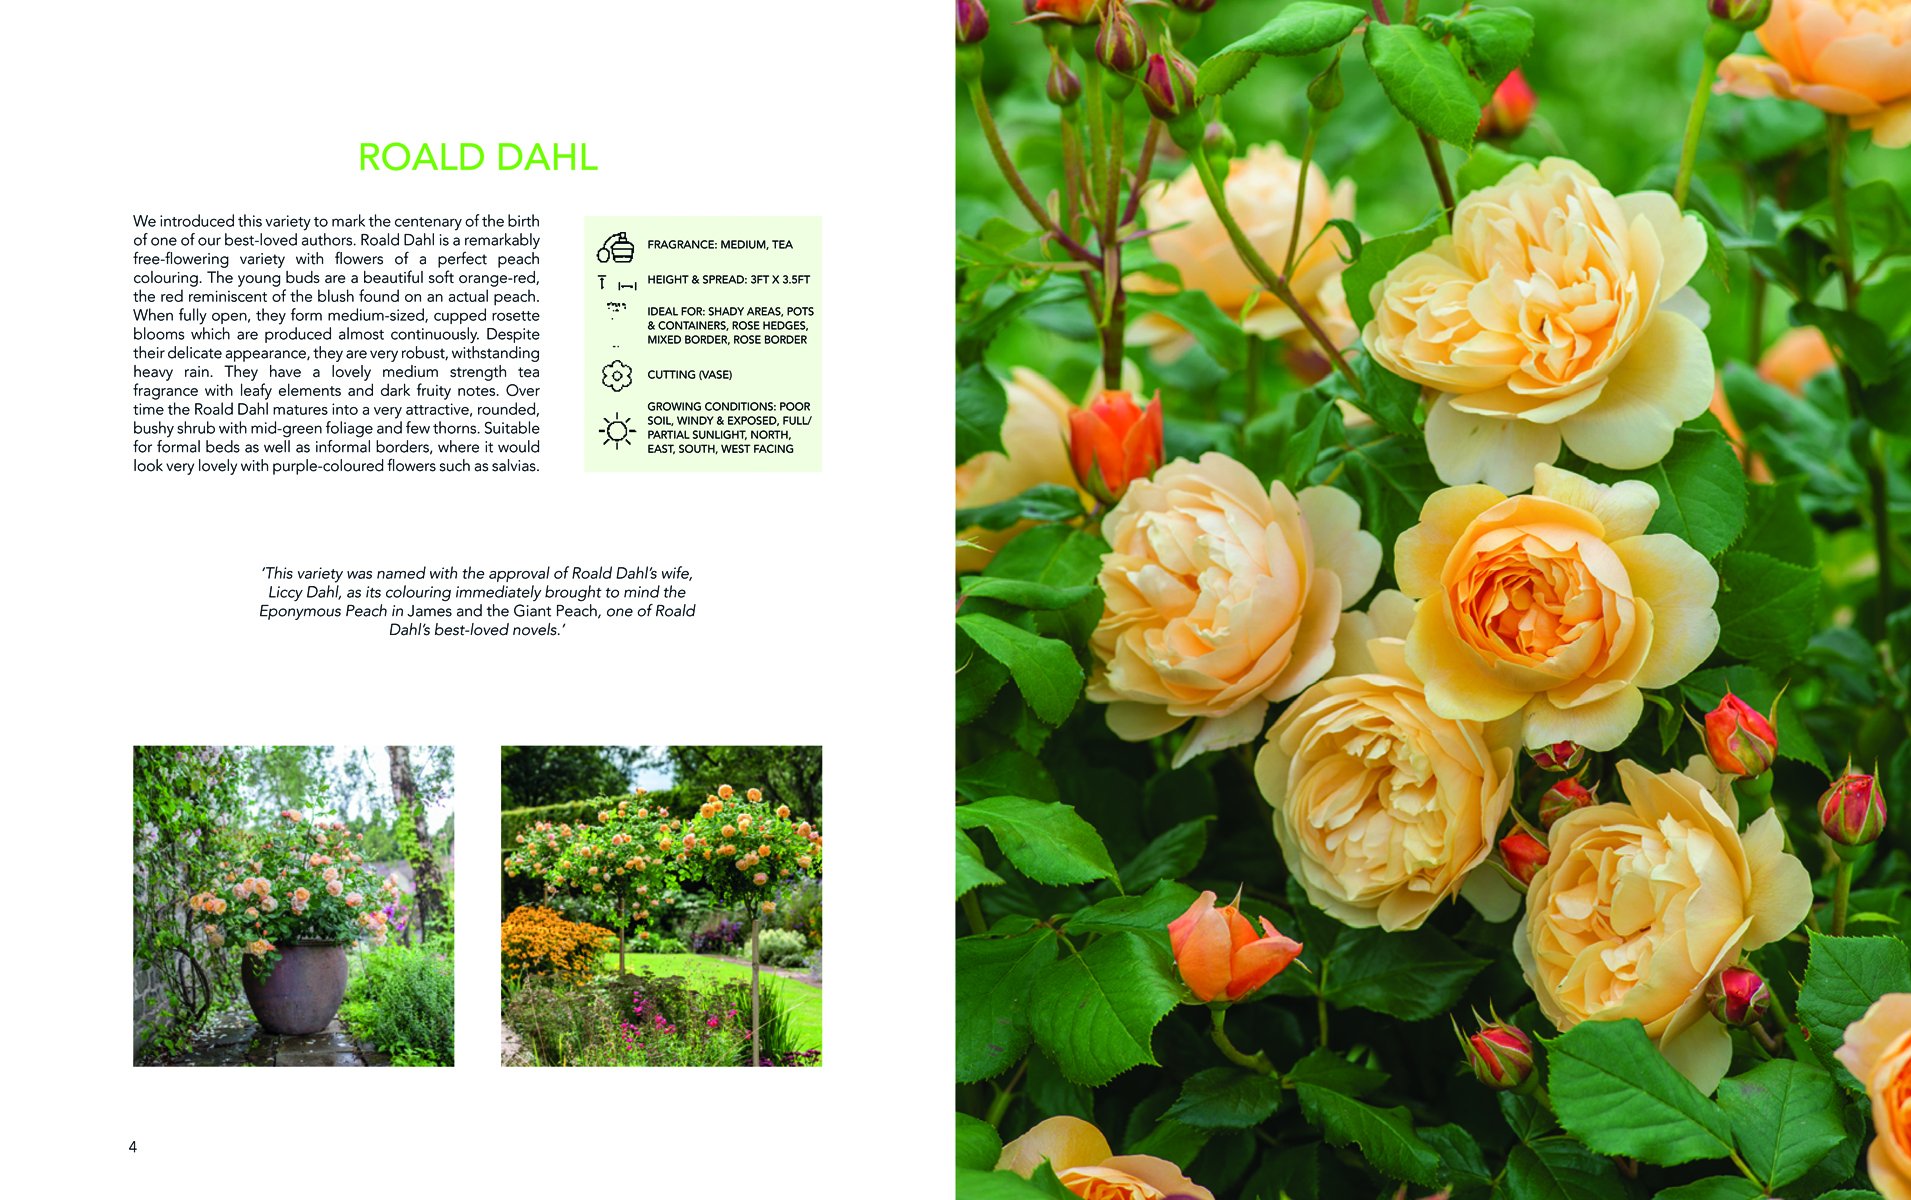 Four vivid colour photos of English roses in pink yellow and cream with David Austin's English Roses in white font on a bright green banner across the middle